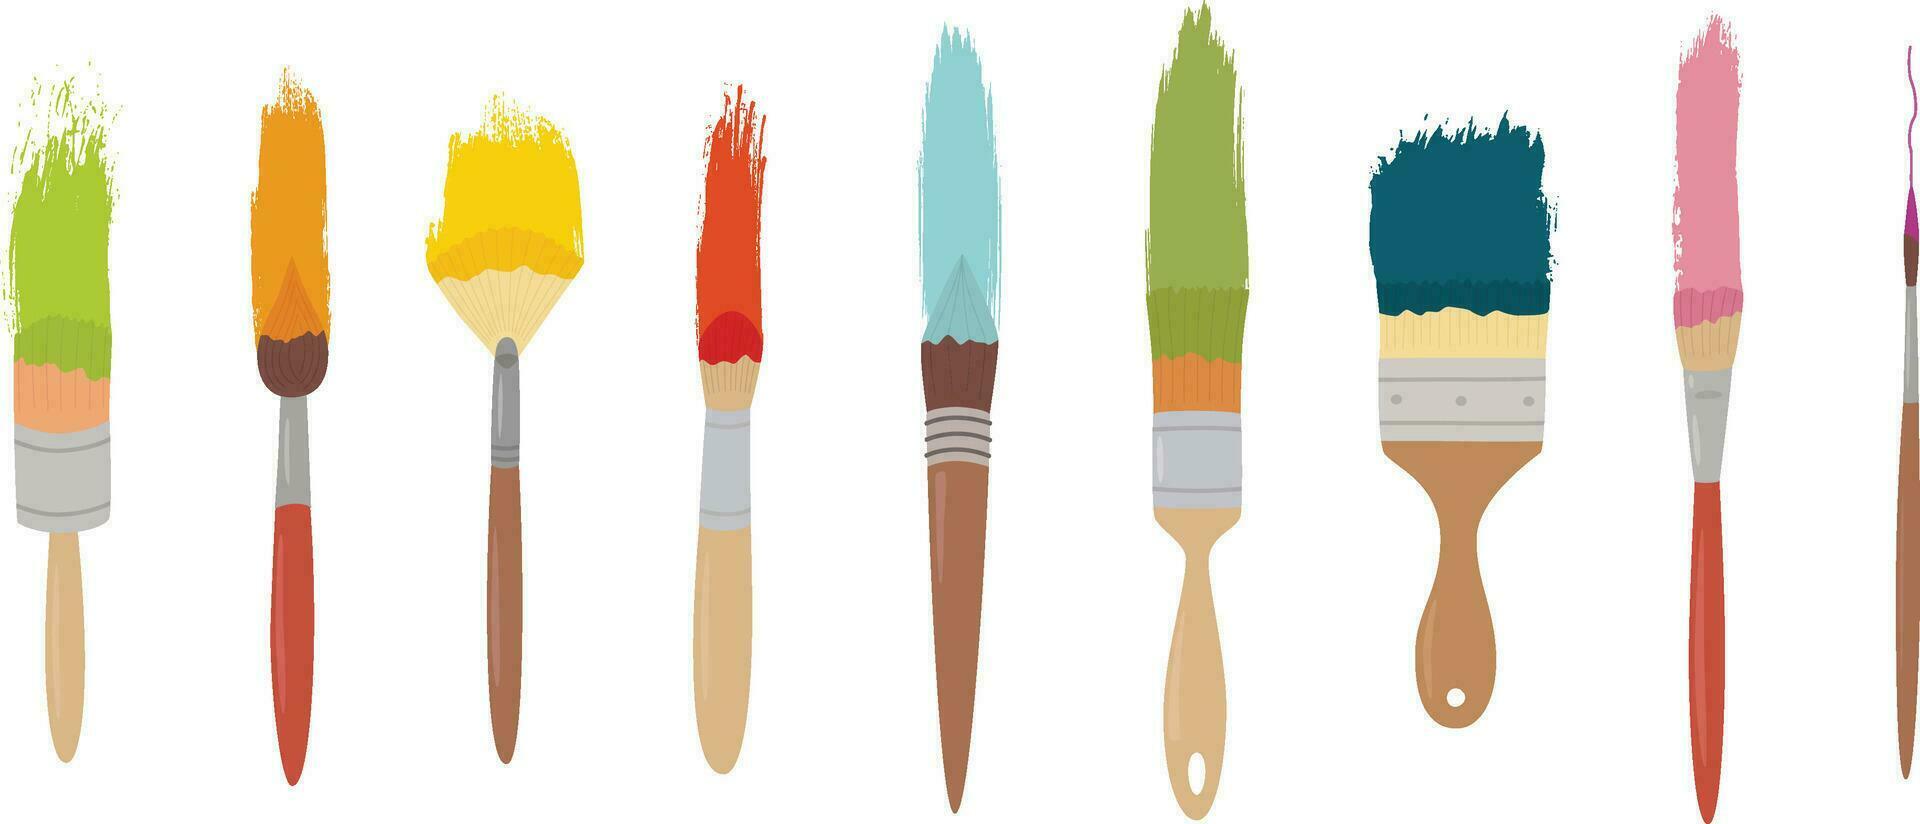 Coloured brush strokes with brushes, art materials vector